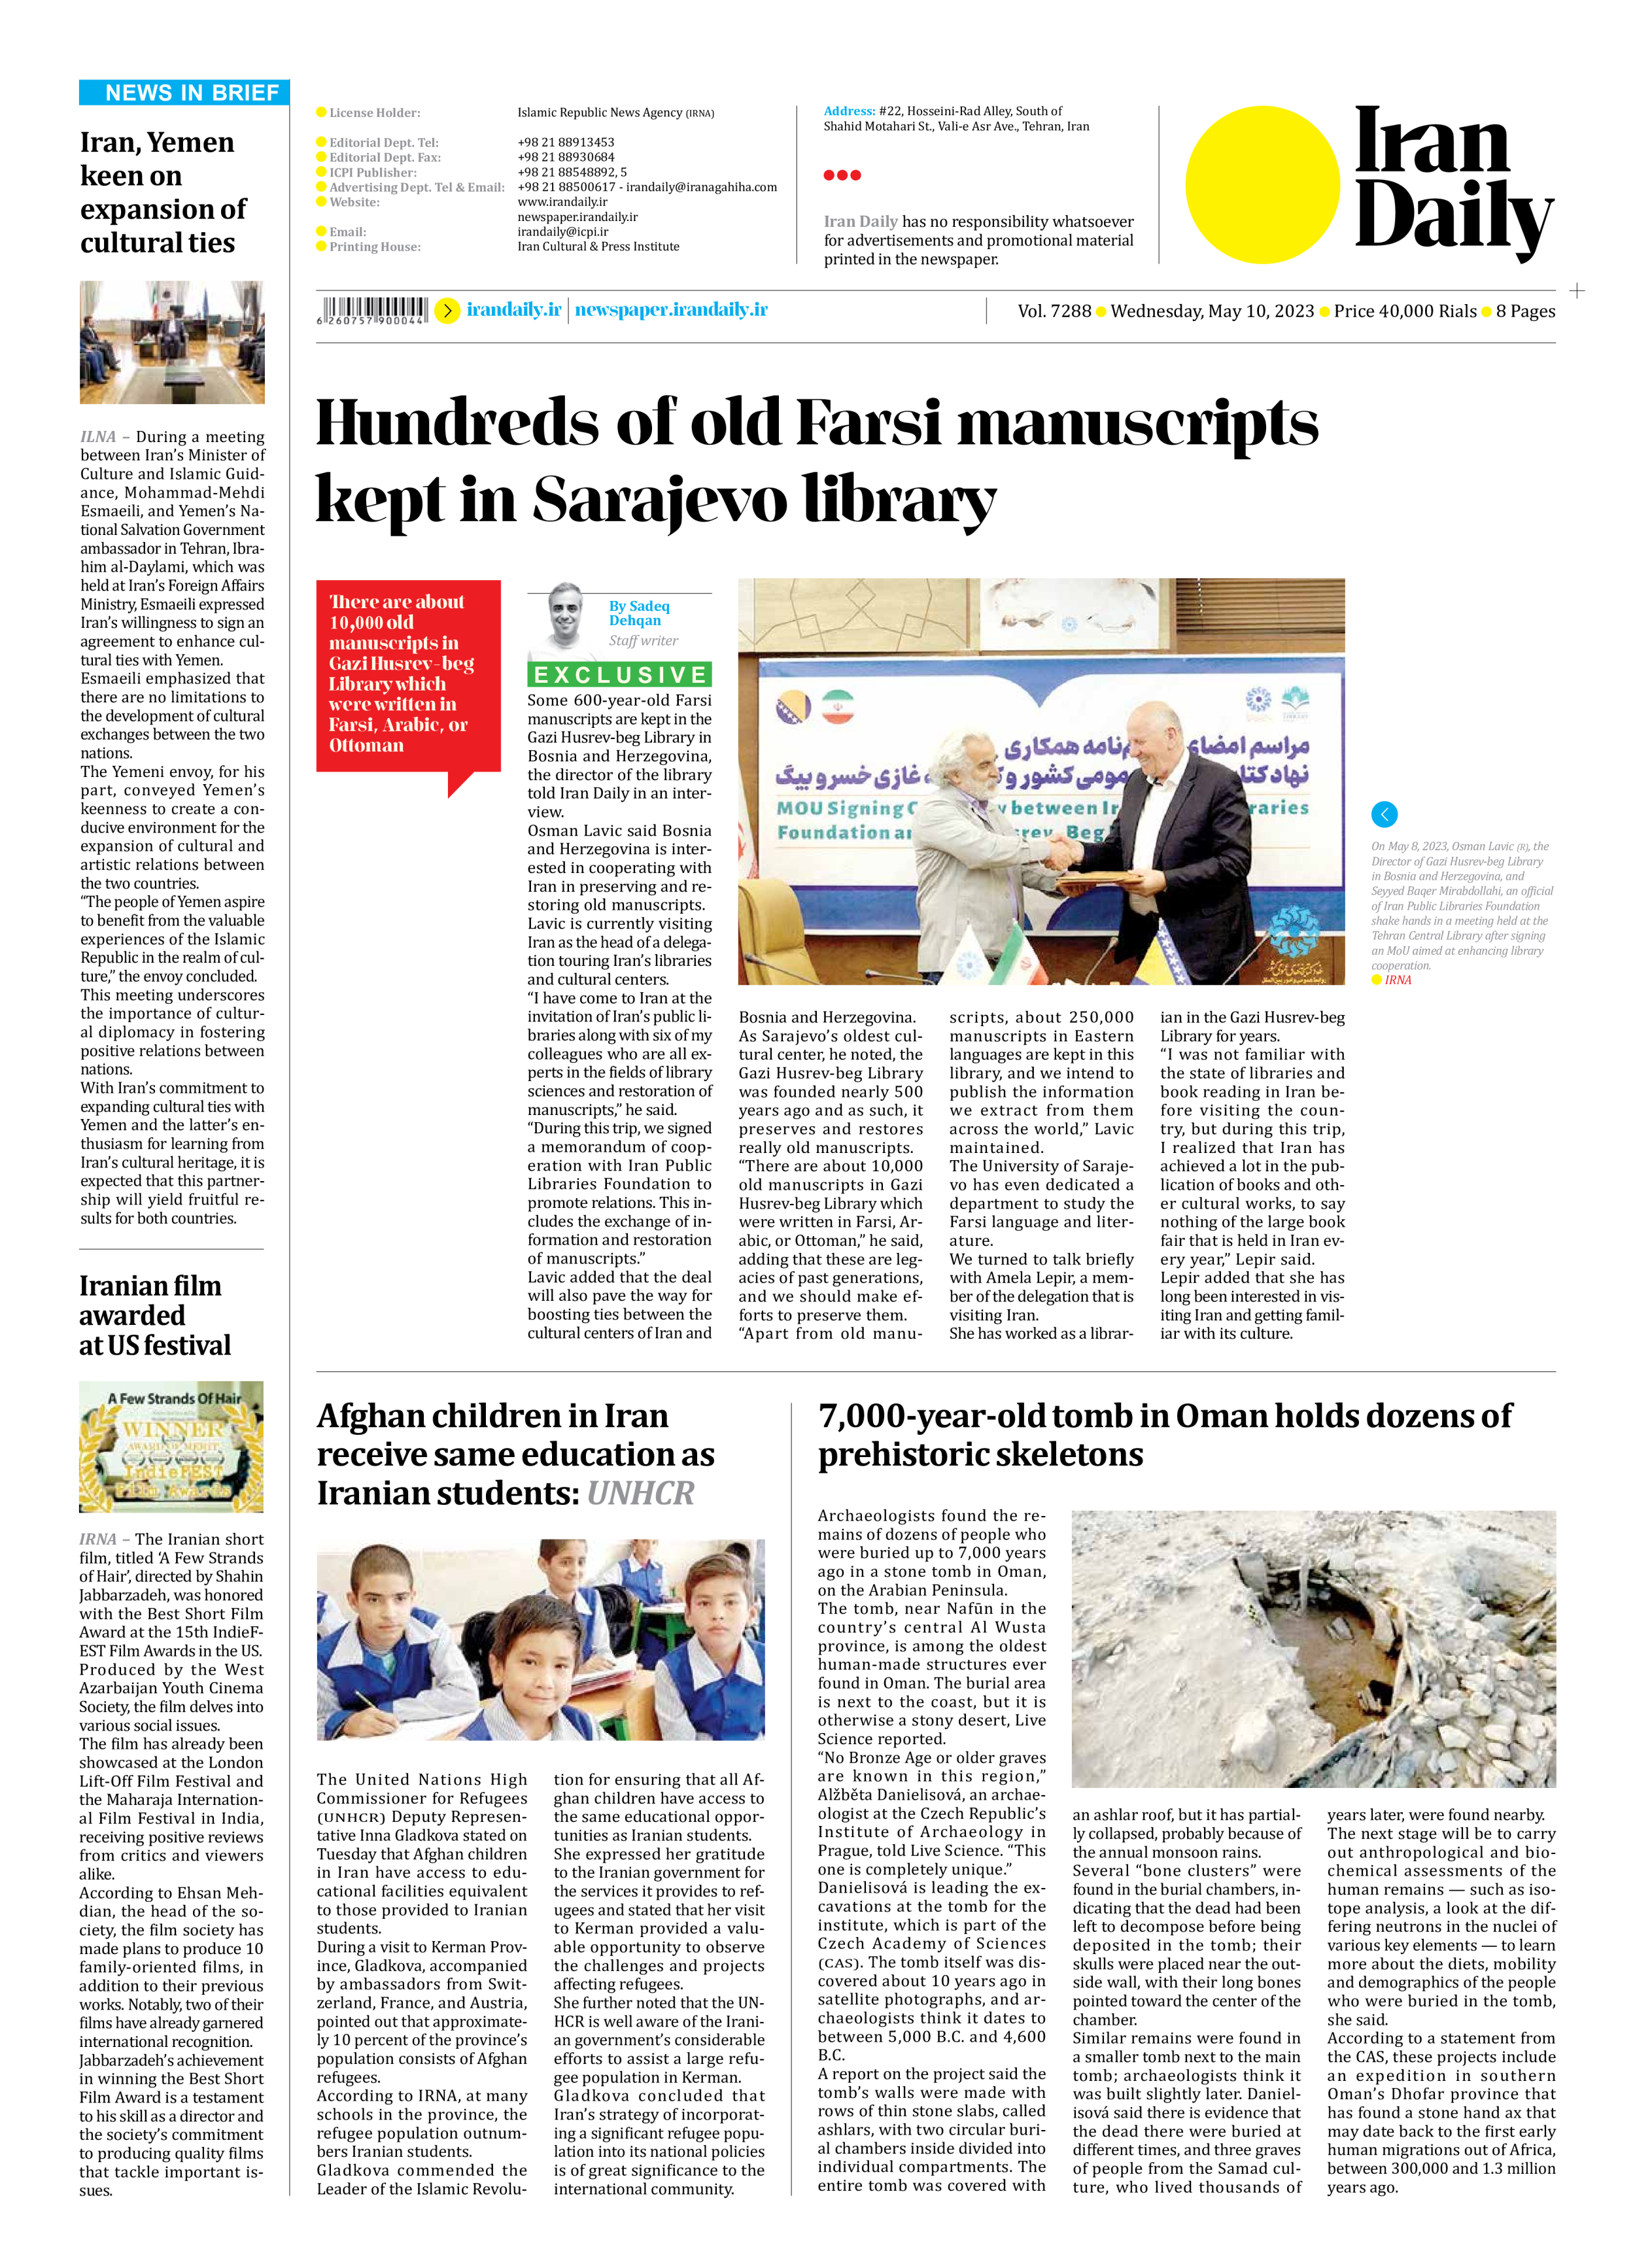 Iran Daily - Number Seven Thousand Two Hundred and Eighty Eight - 10 May 2023 - Page 8